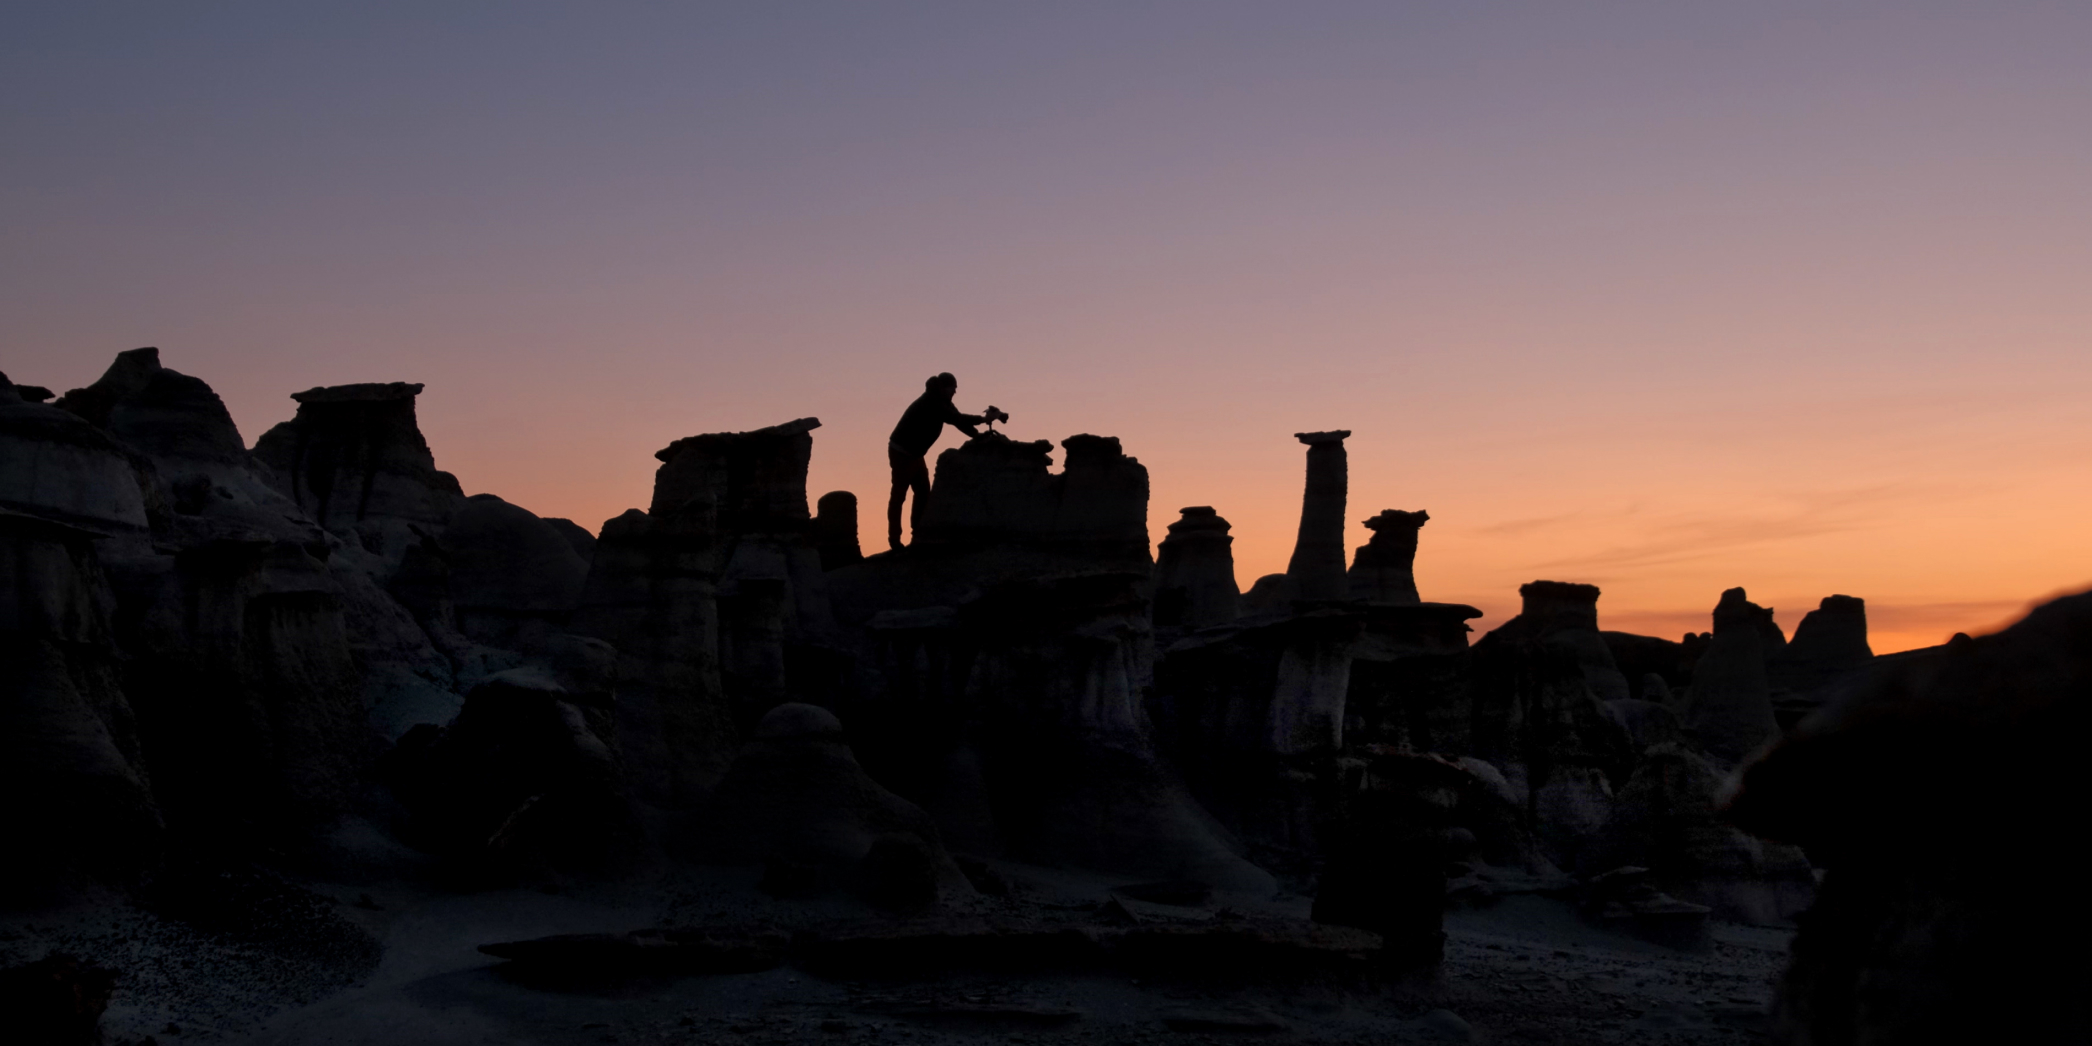 Silhouette of photographer Andy Best leaning over rock formations with a camera at sunset